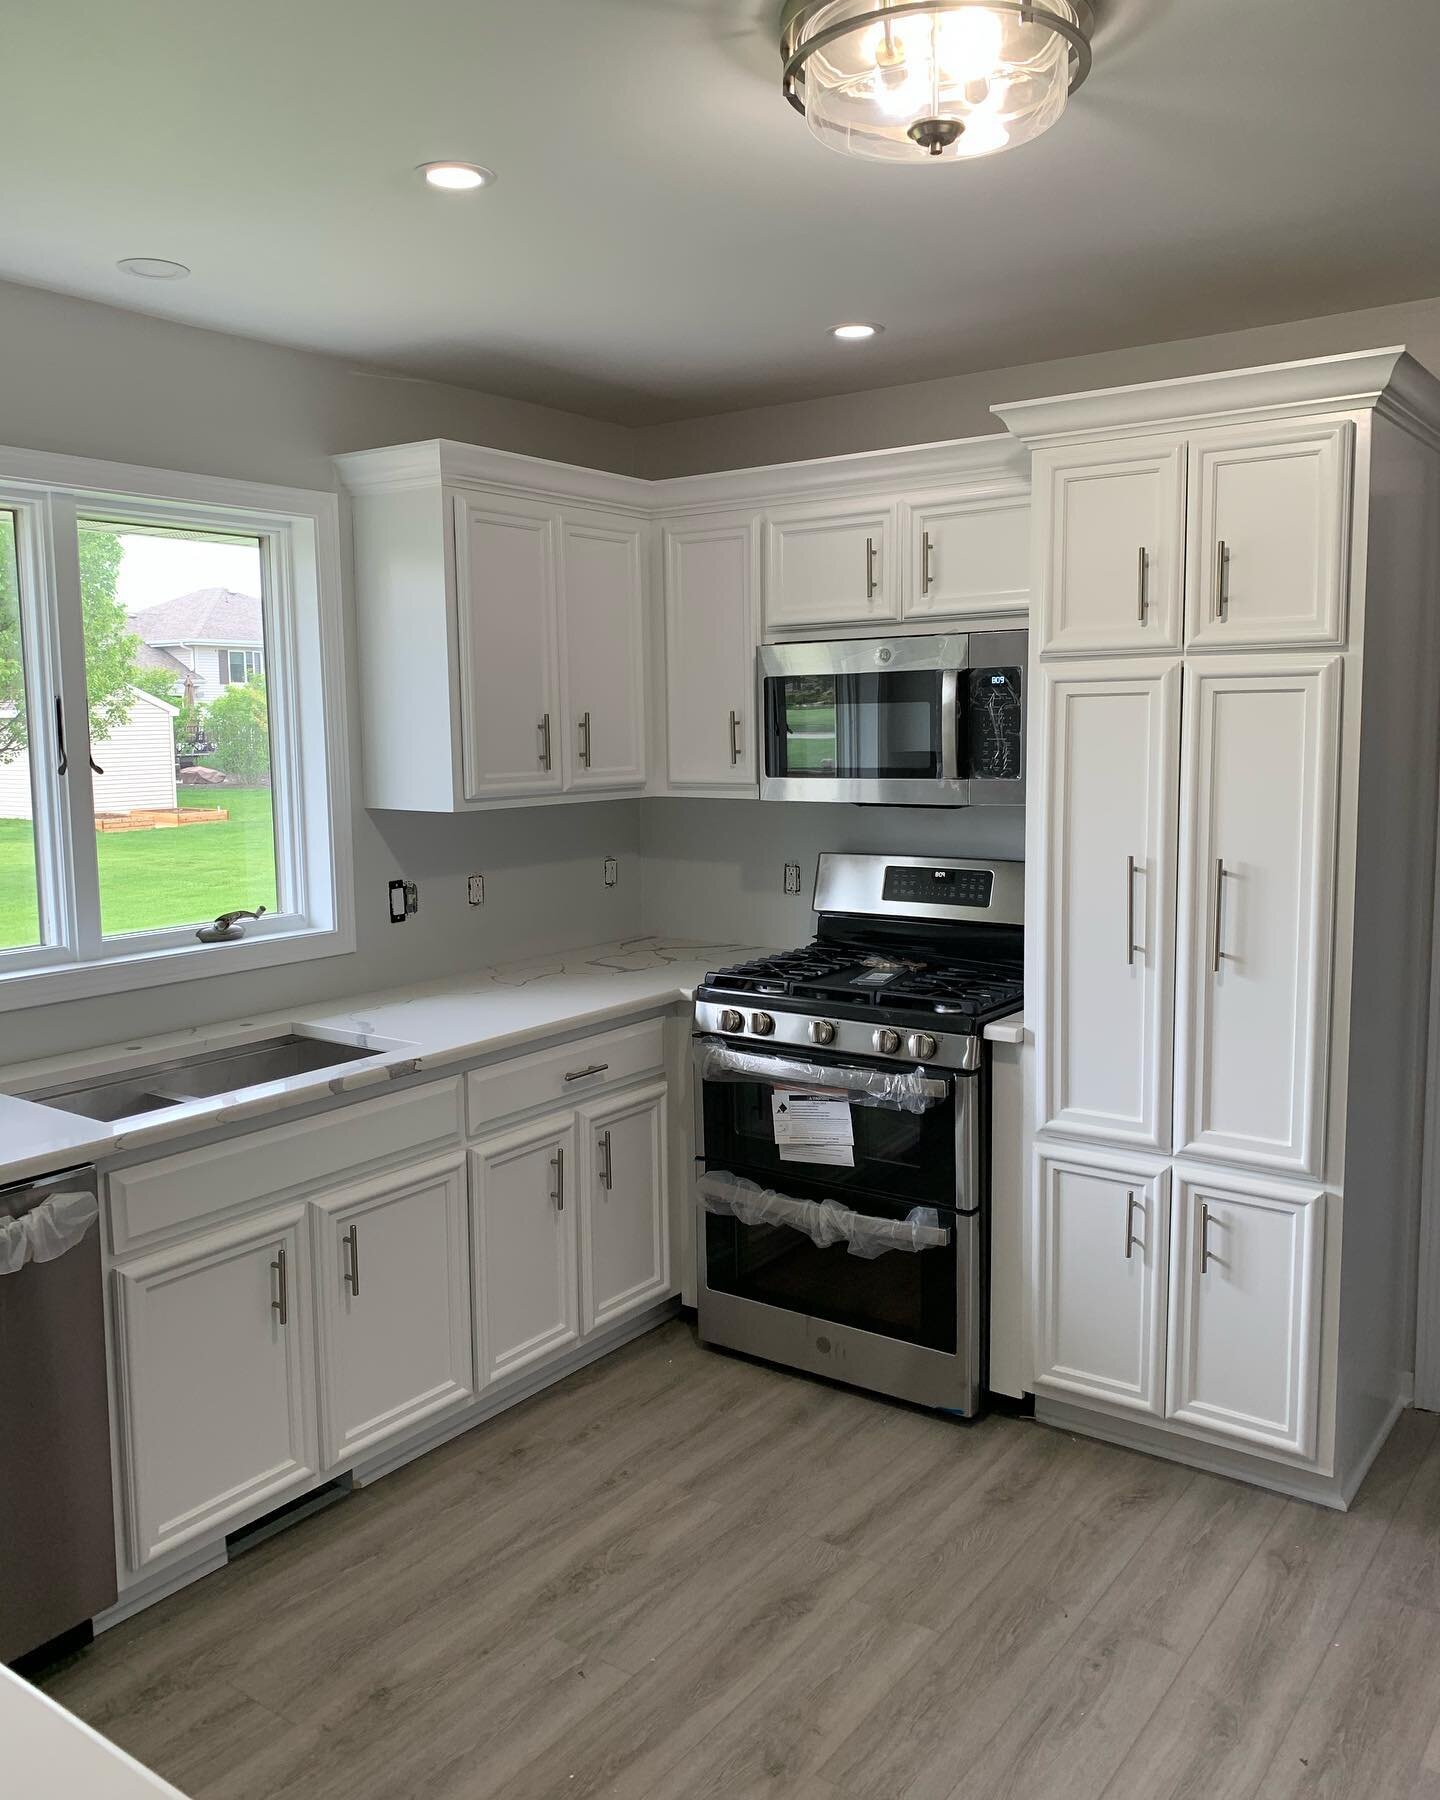 New paint and counter make all the difference 

#diy #diyhomedecor #lakecountyindiana #remodeling #renovationproject #kitchen #interiordesign #homedecor #mykitchen #houseflipping #interior #architecture #painting #countertops #design #homestyling #ho